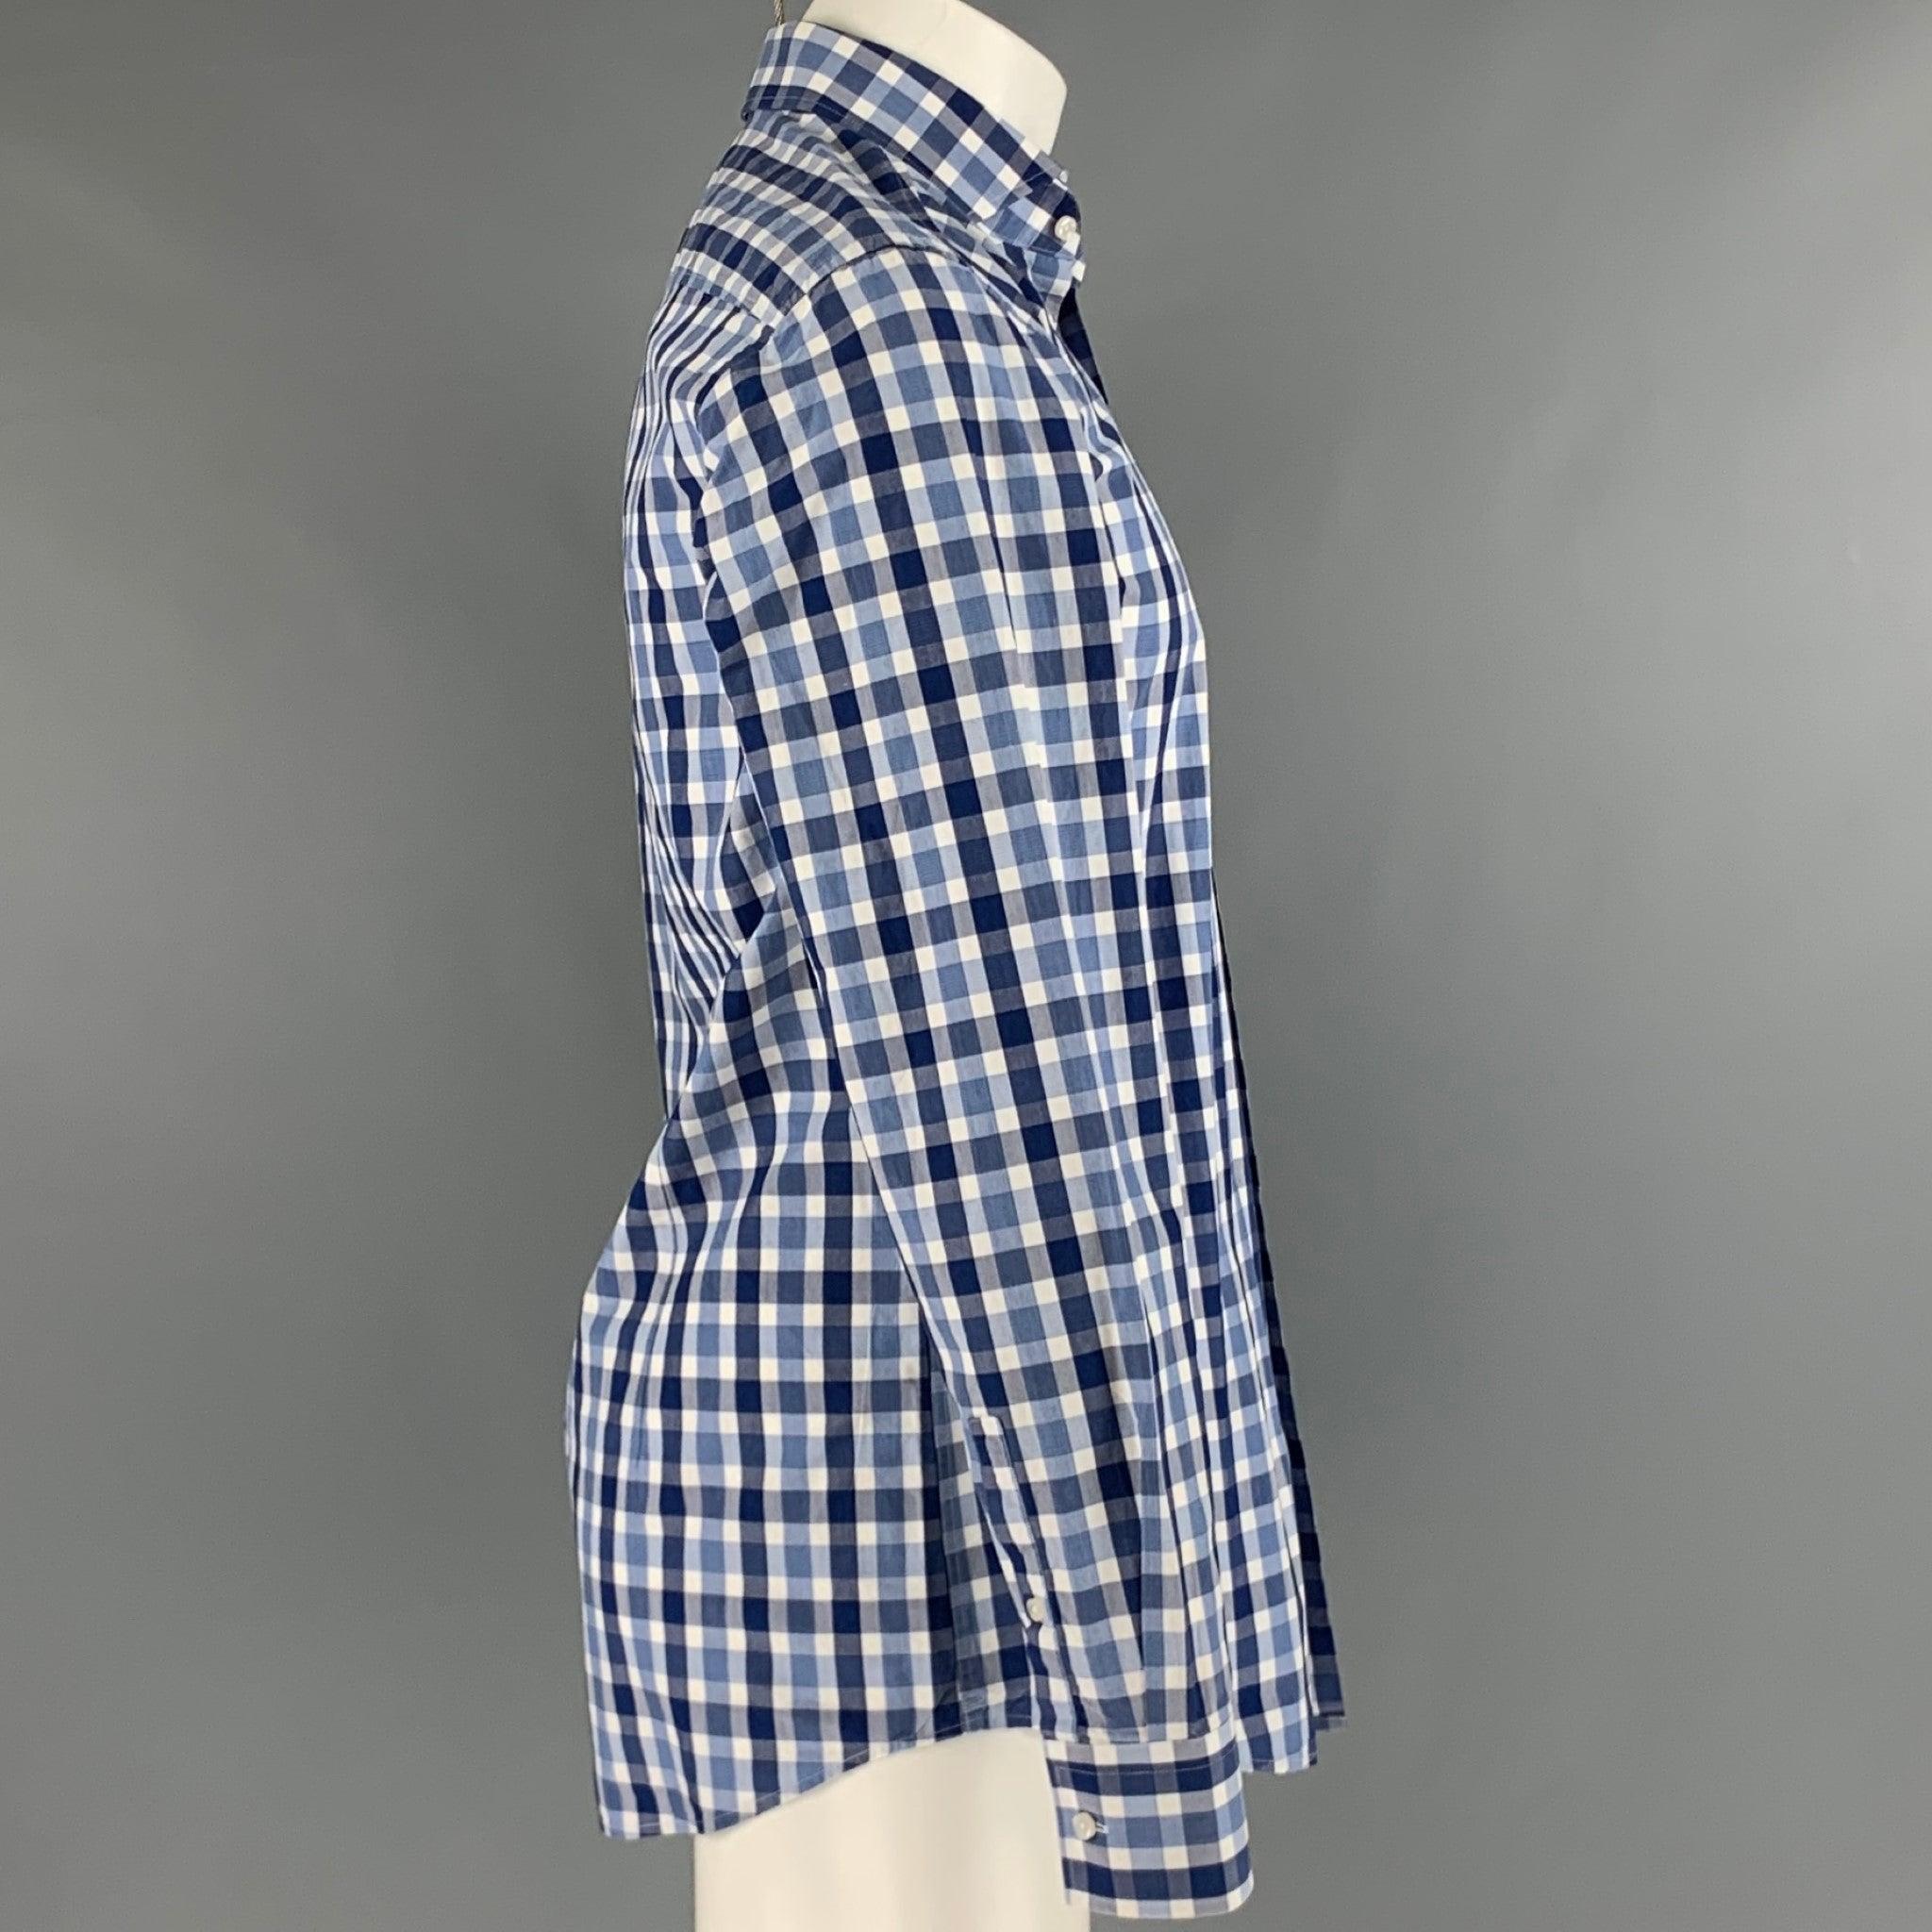 HUGO BOSS long sleeve shirt
in a
blue and white cotton fabric featuring plaid pattern, slim fit, and button closure.Very Good Pre-Owned Condition. Minor pilling. 

Marked:   15.5 

Measurements: 
 
Shoulder: 17 inches Chest: 38 inches Sleeve: 26